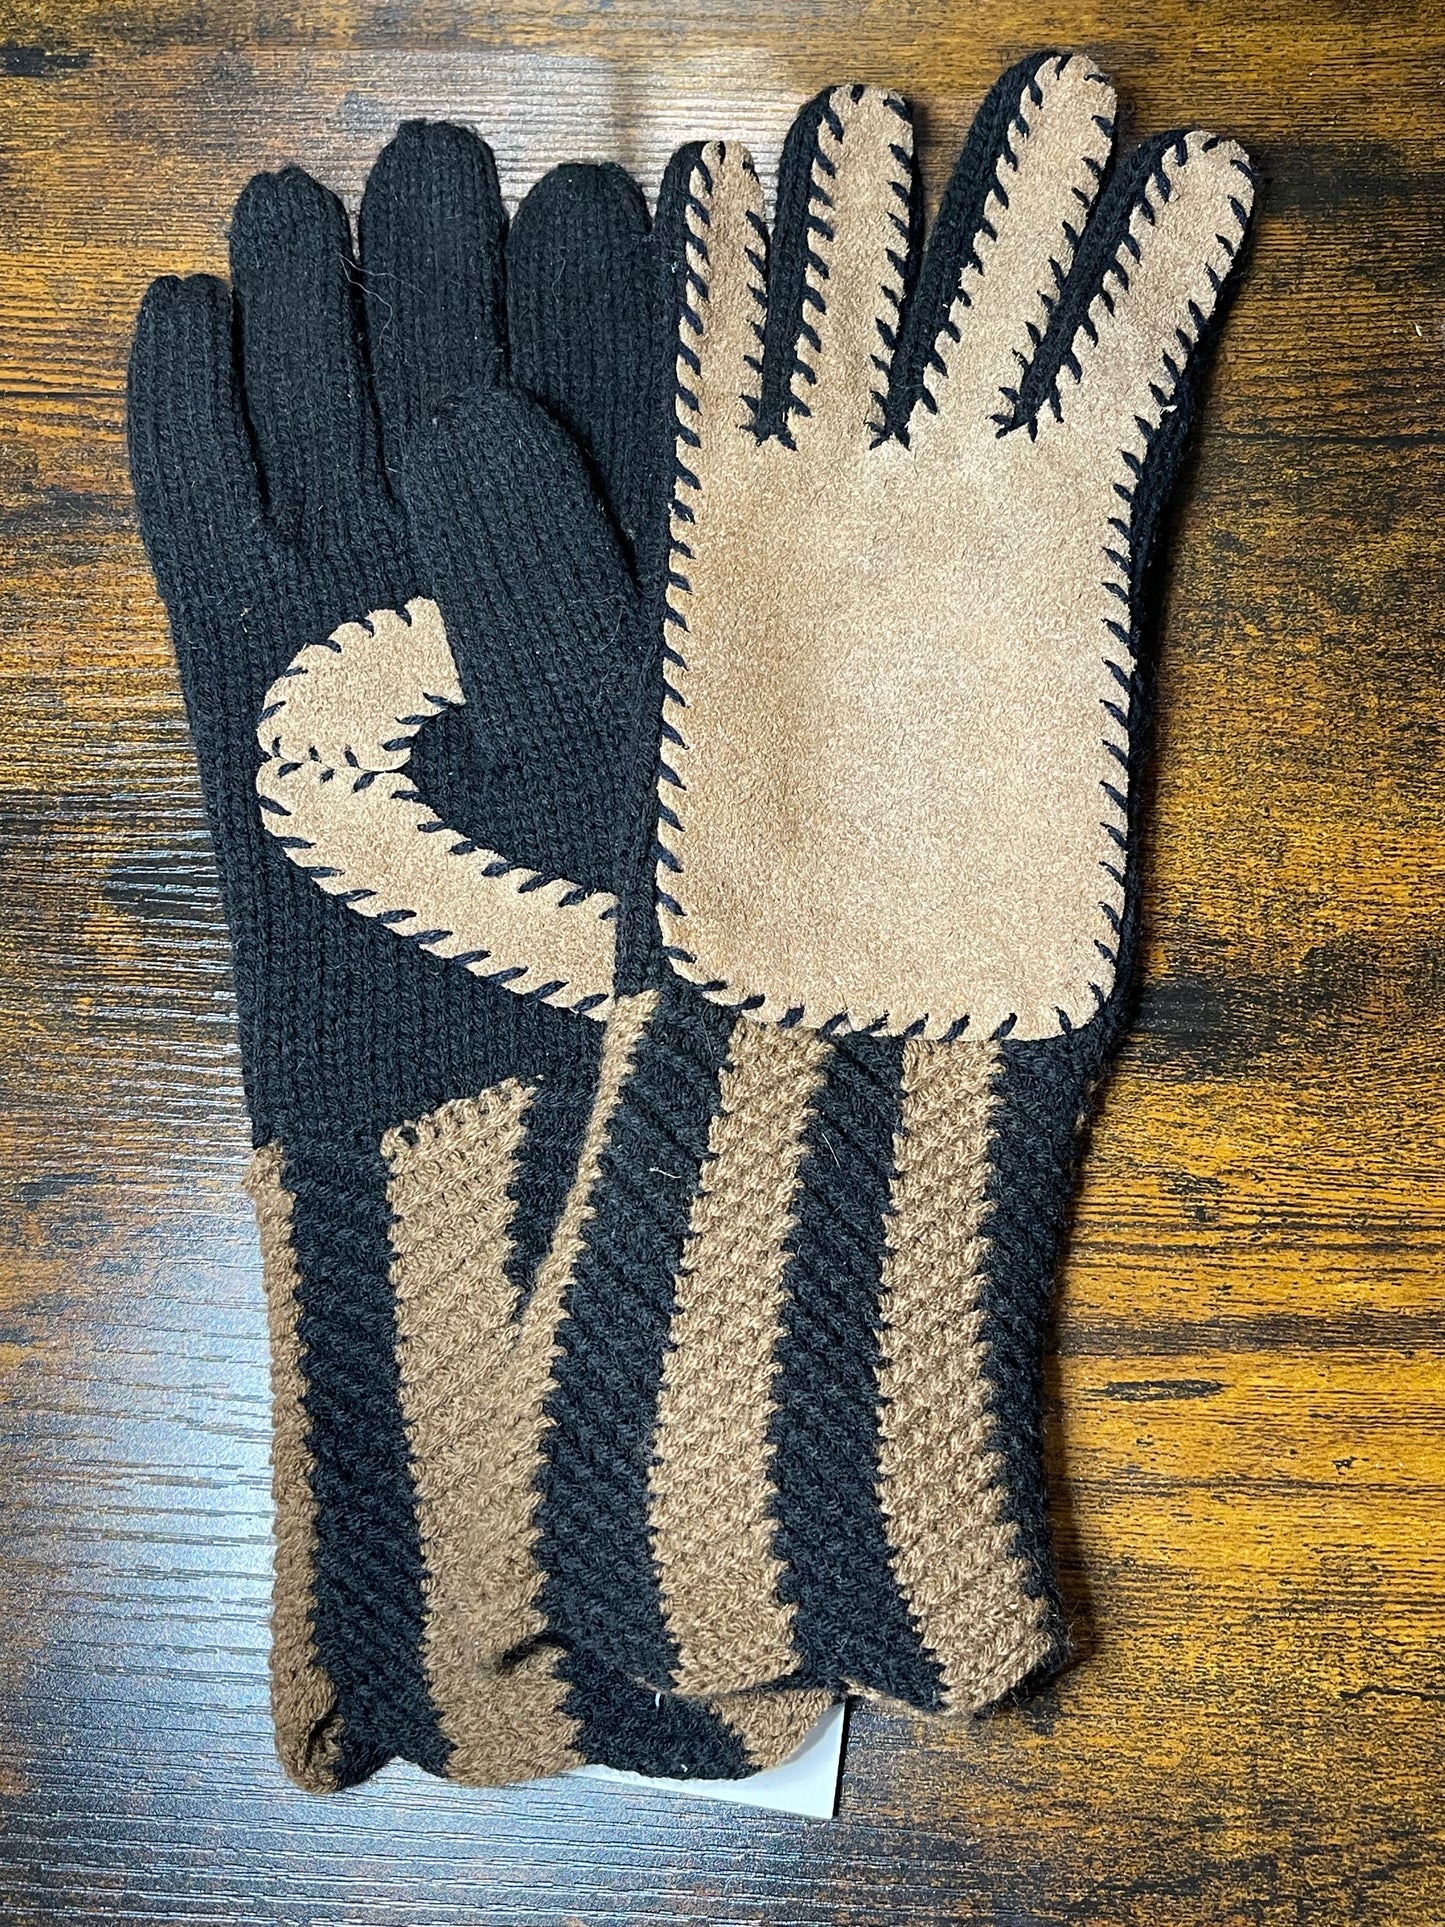 Knit and suede winter gloves